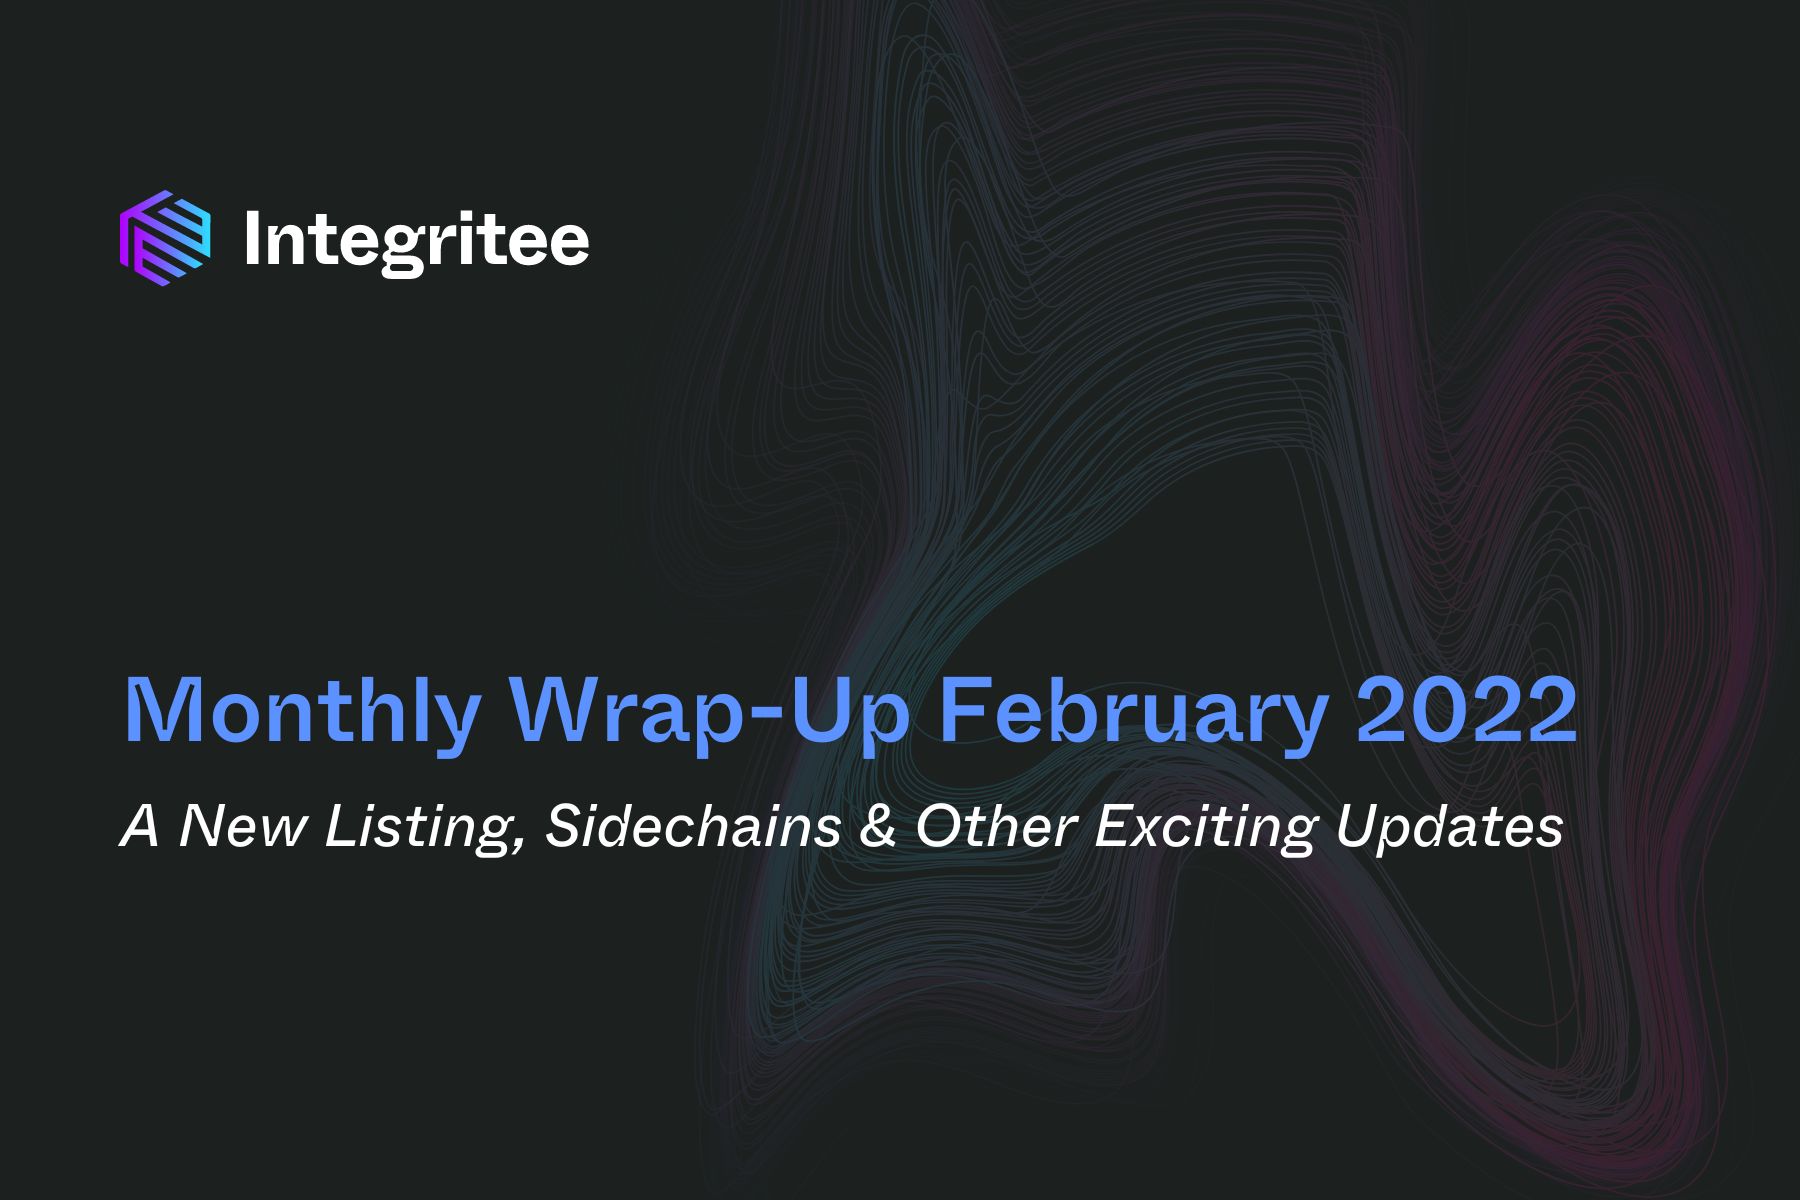 Monthly Wrap-Up February 2022: A New Listing, Sidechains & Other Updates